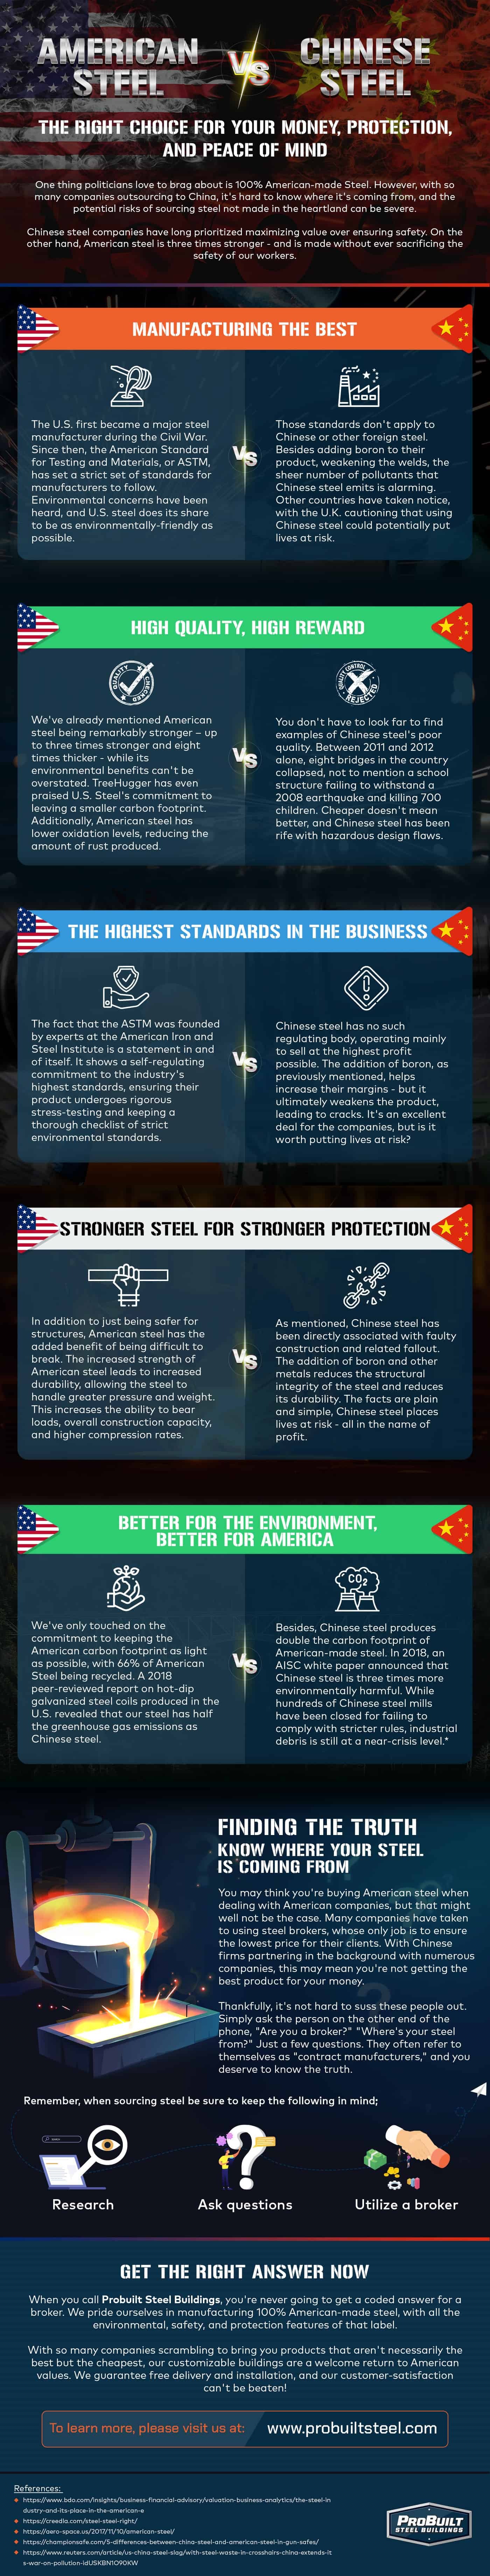 American vs. Chinese Steel: Patriotism and Safety Over Price